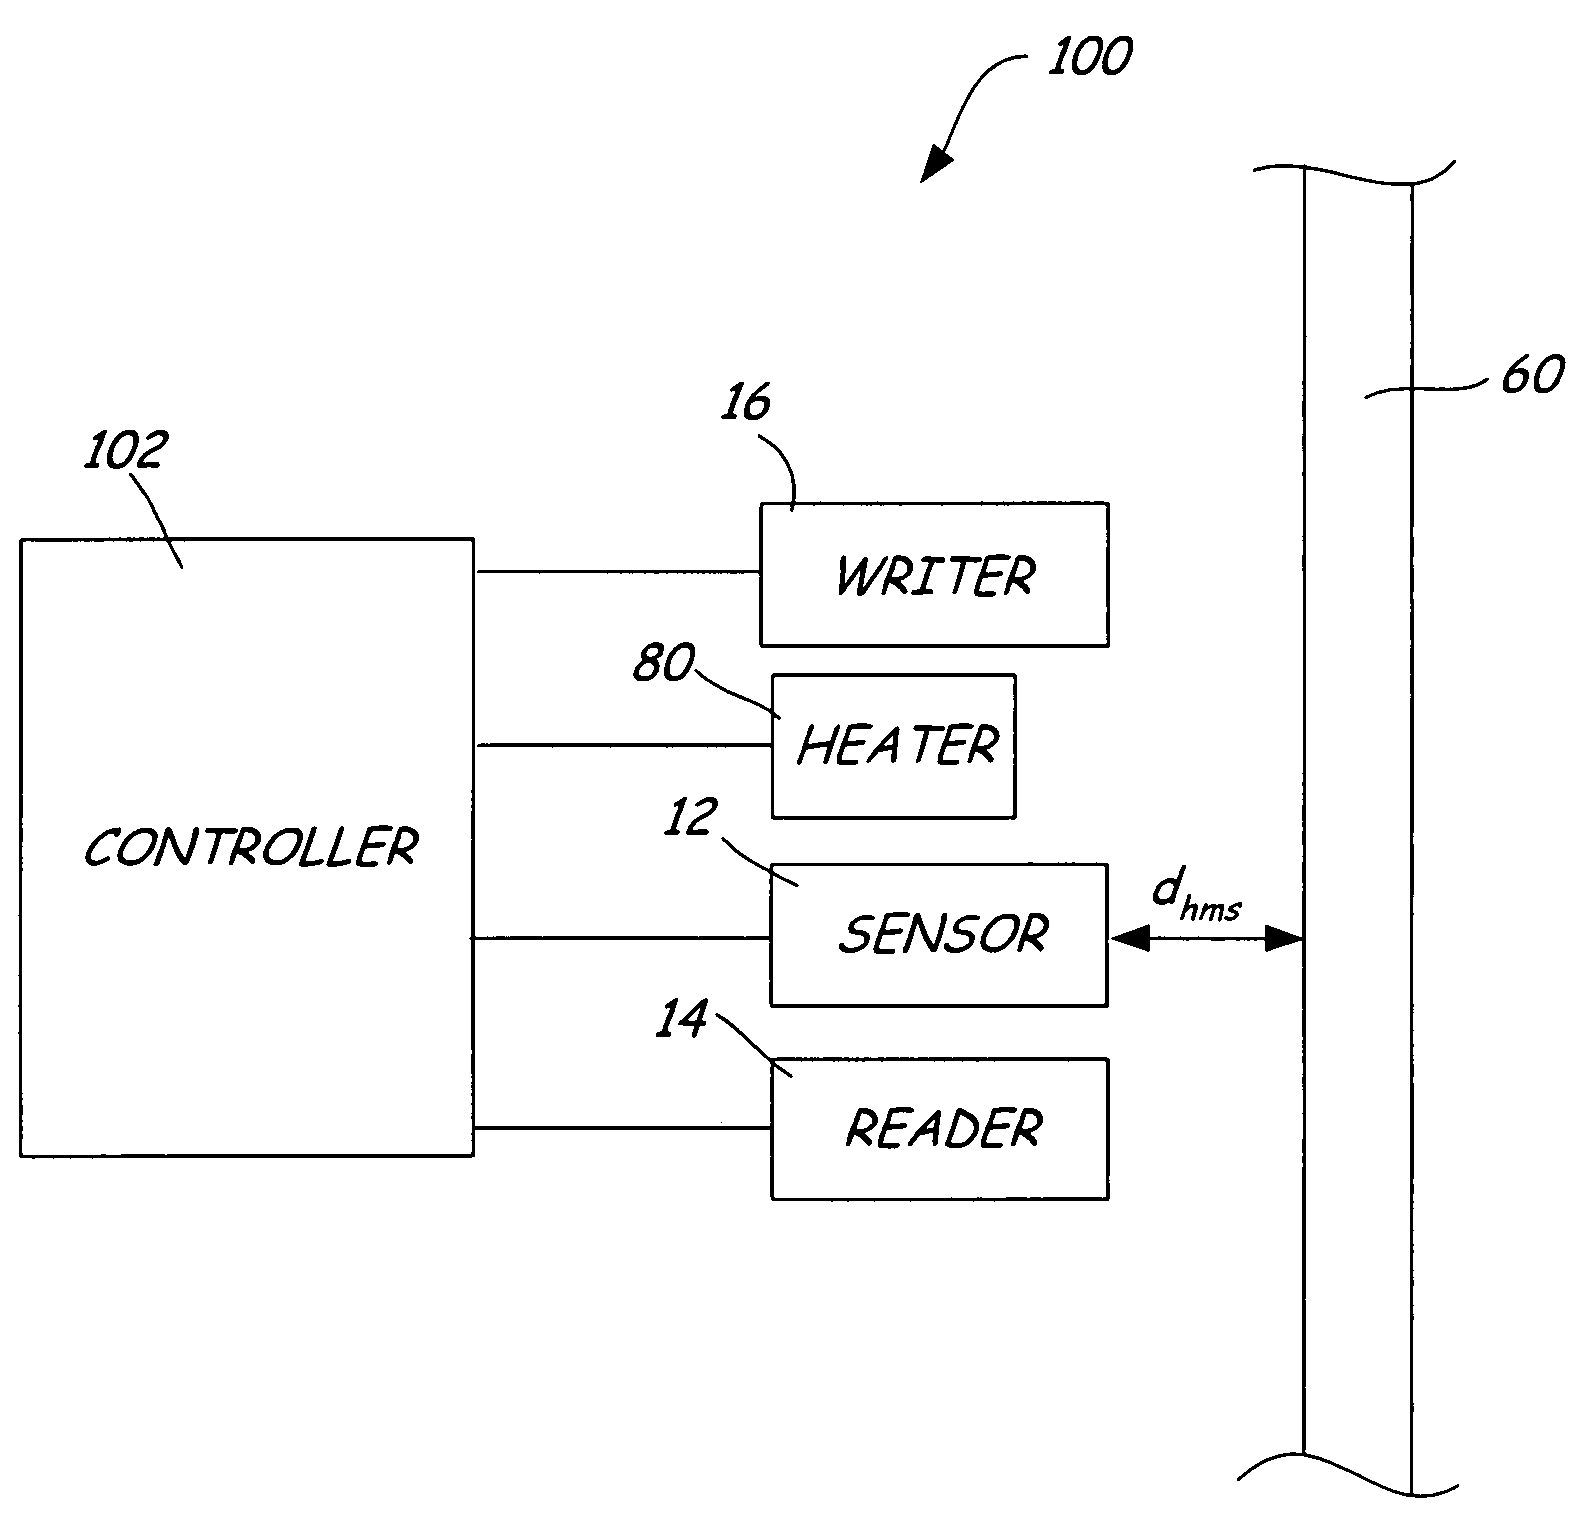 Magnetic recording device including a thermal proximity sensor